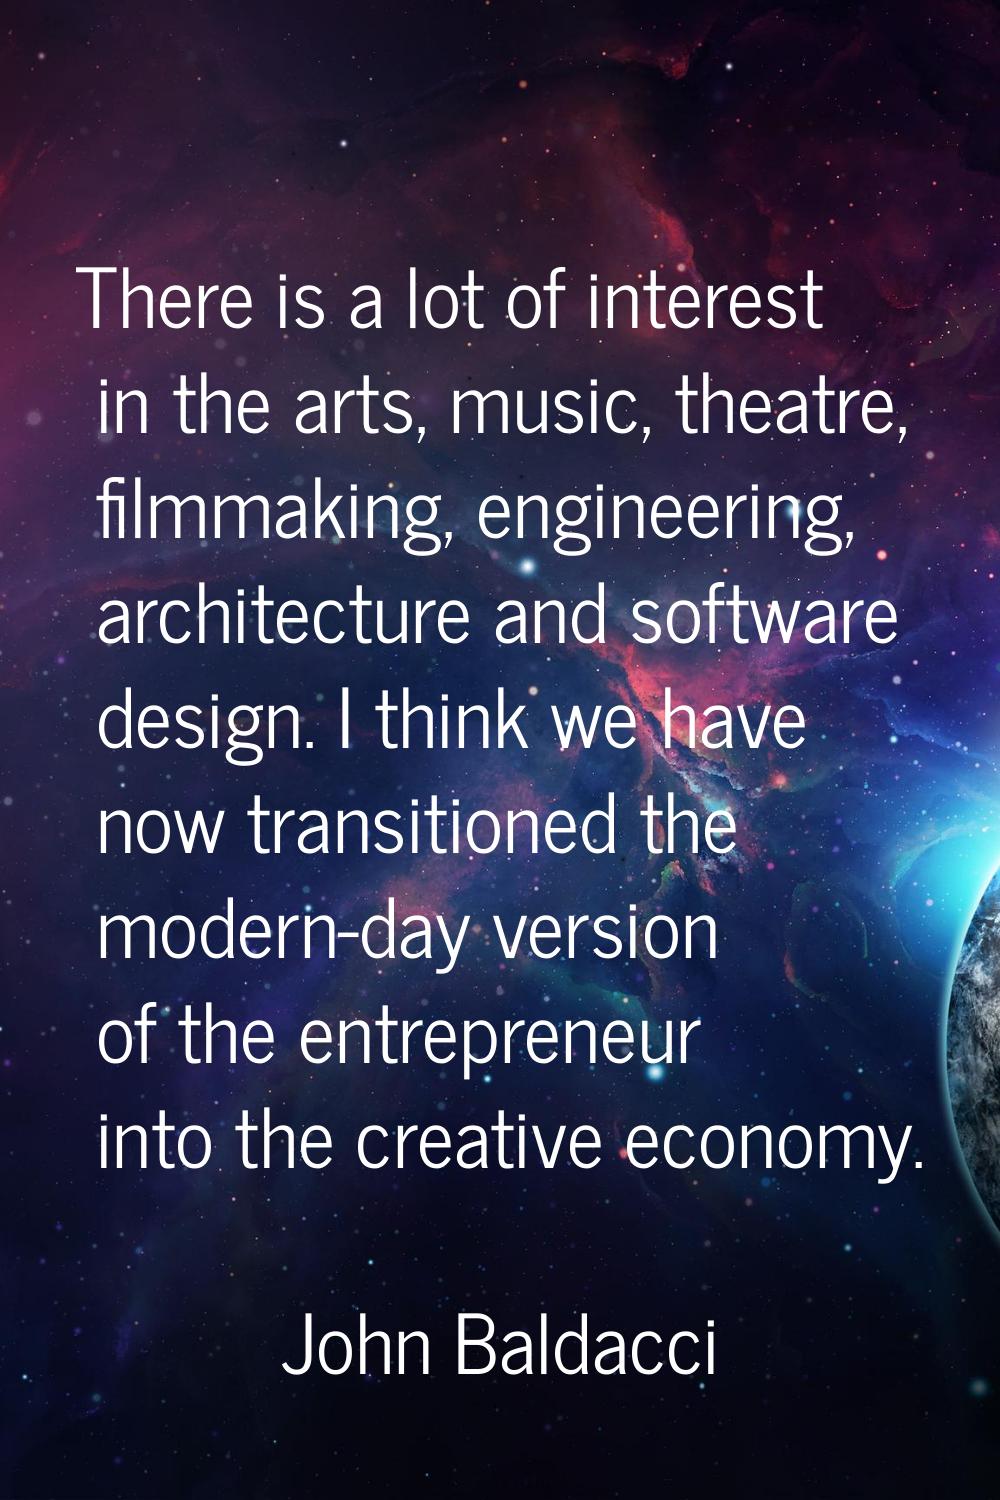 There is a lot of interest in the arts, music, theatre, filmmaking, engineering, architecture and s